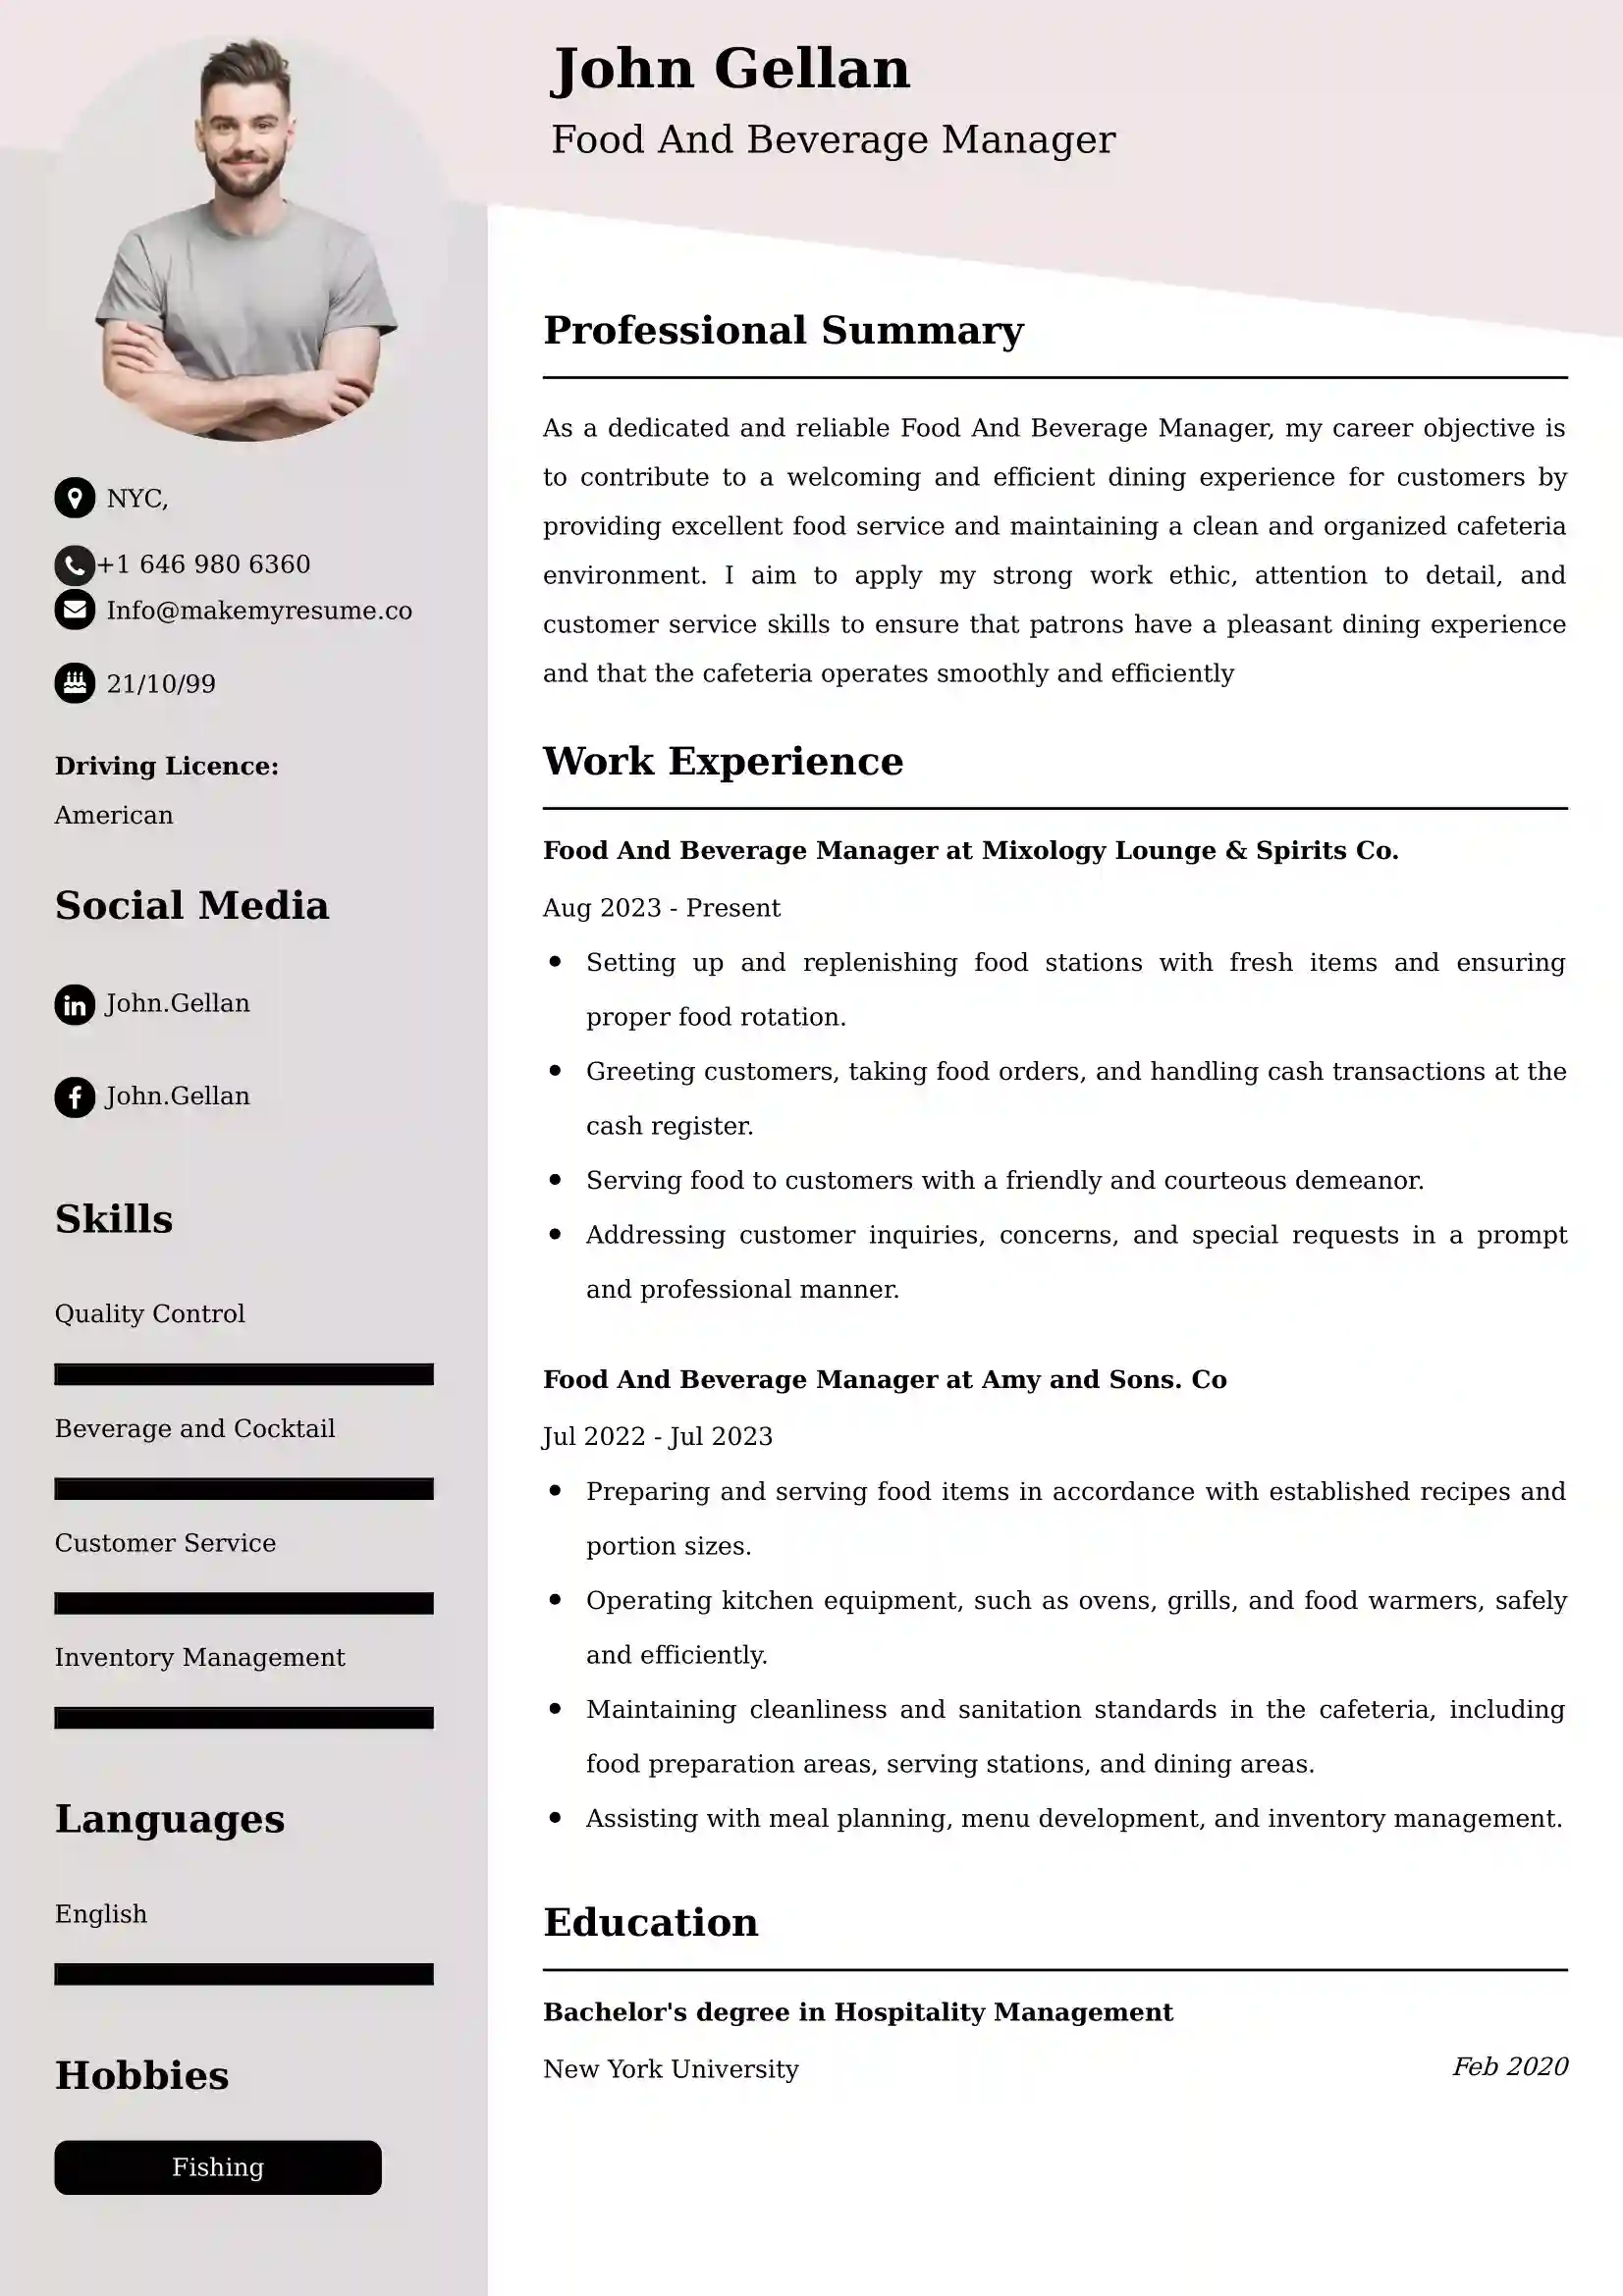 Food And Beverage Manager Resume Examples - Australian Format and Tips